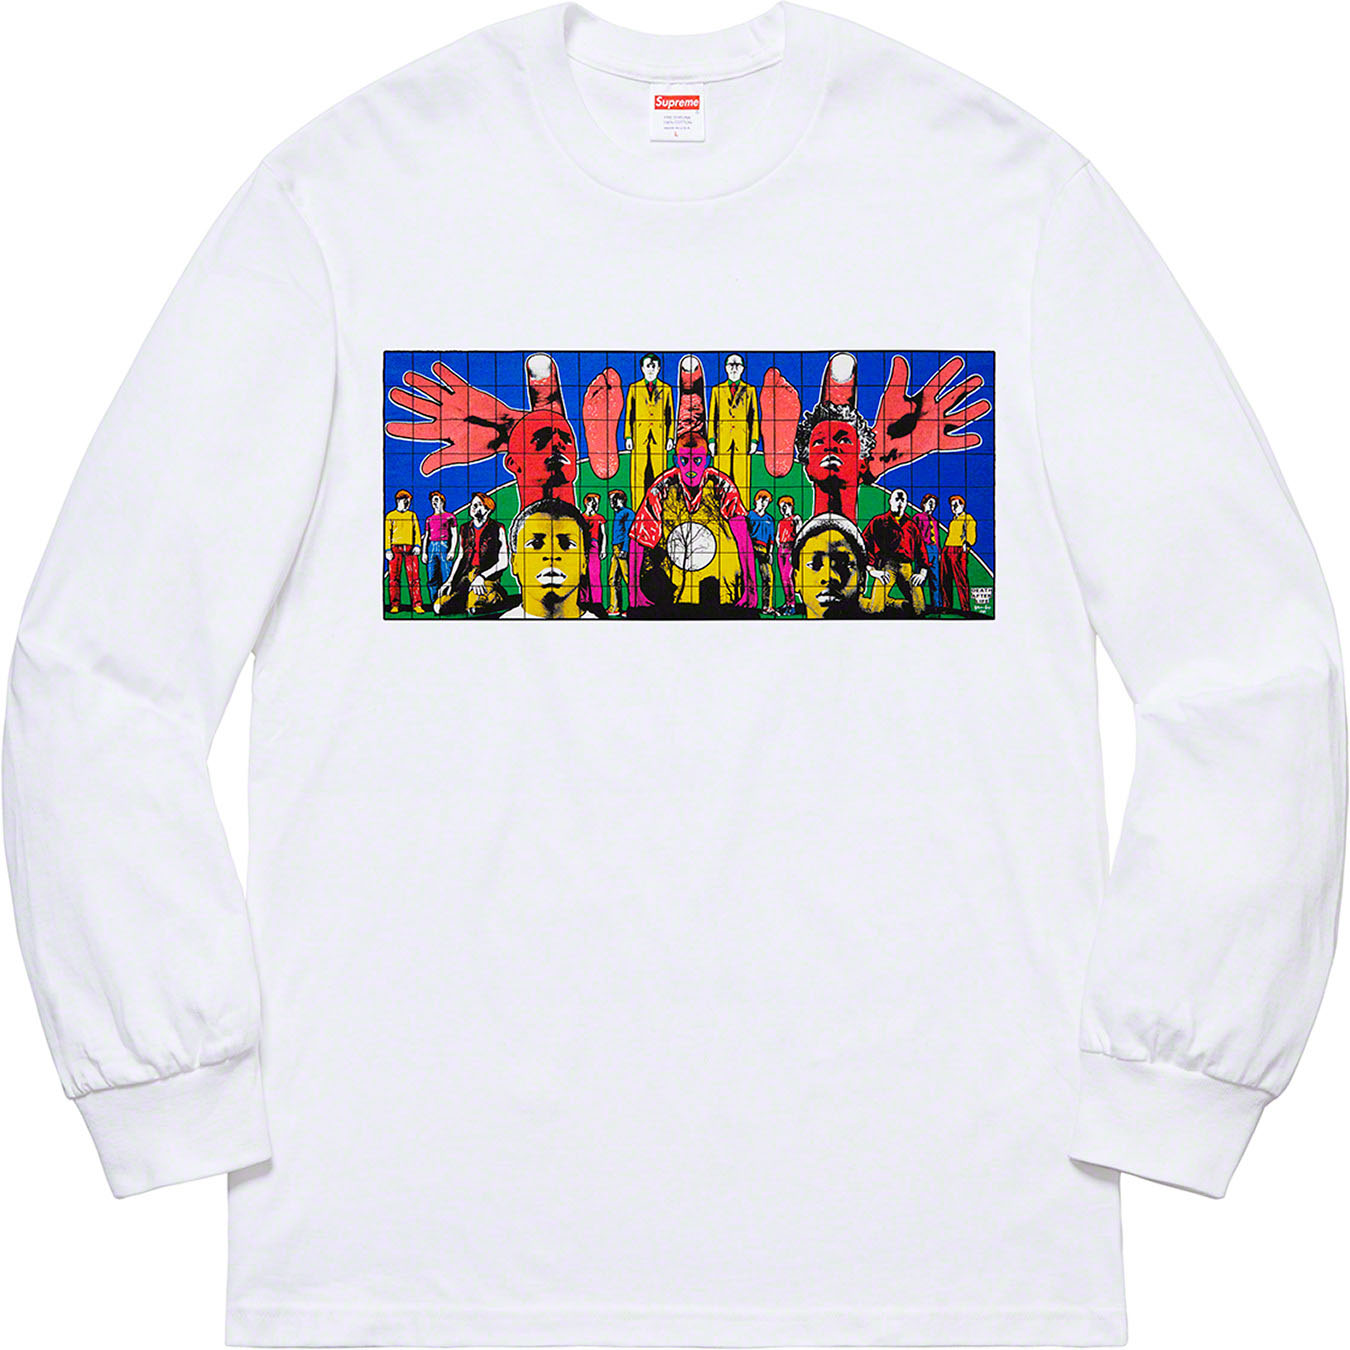 Gilbert & George/Supreme DEATH AFTER LIFE L/S Tee